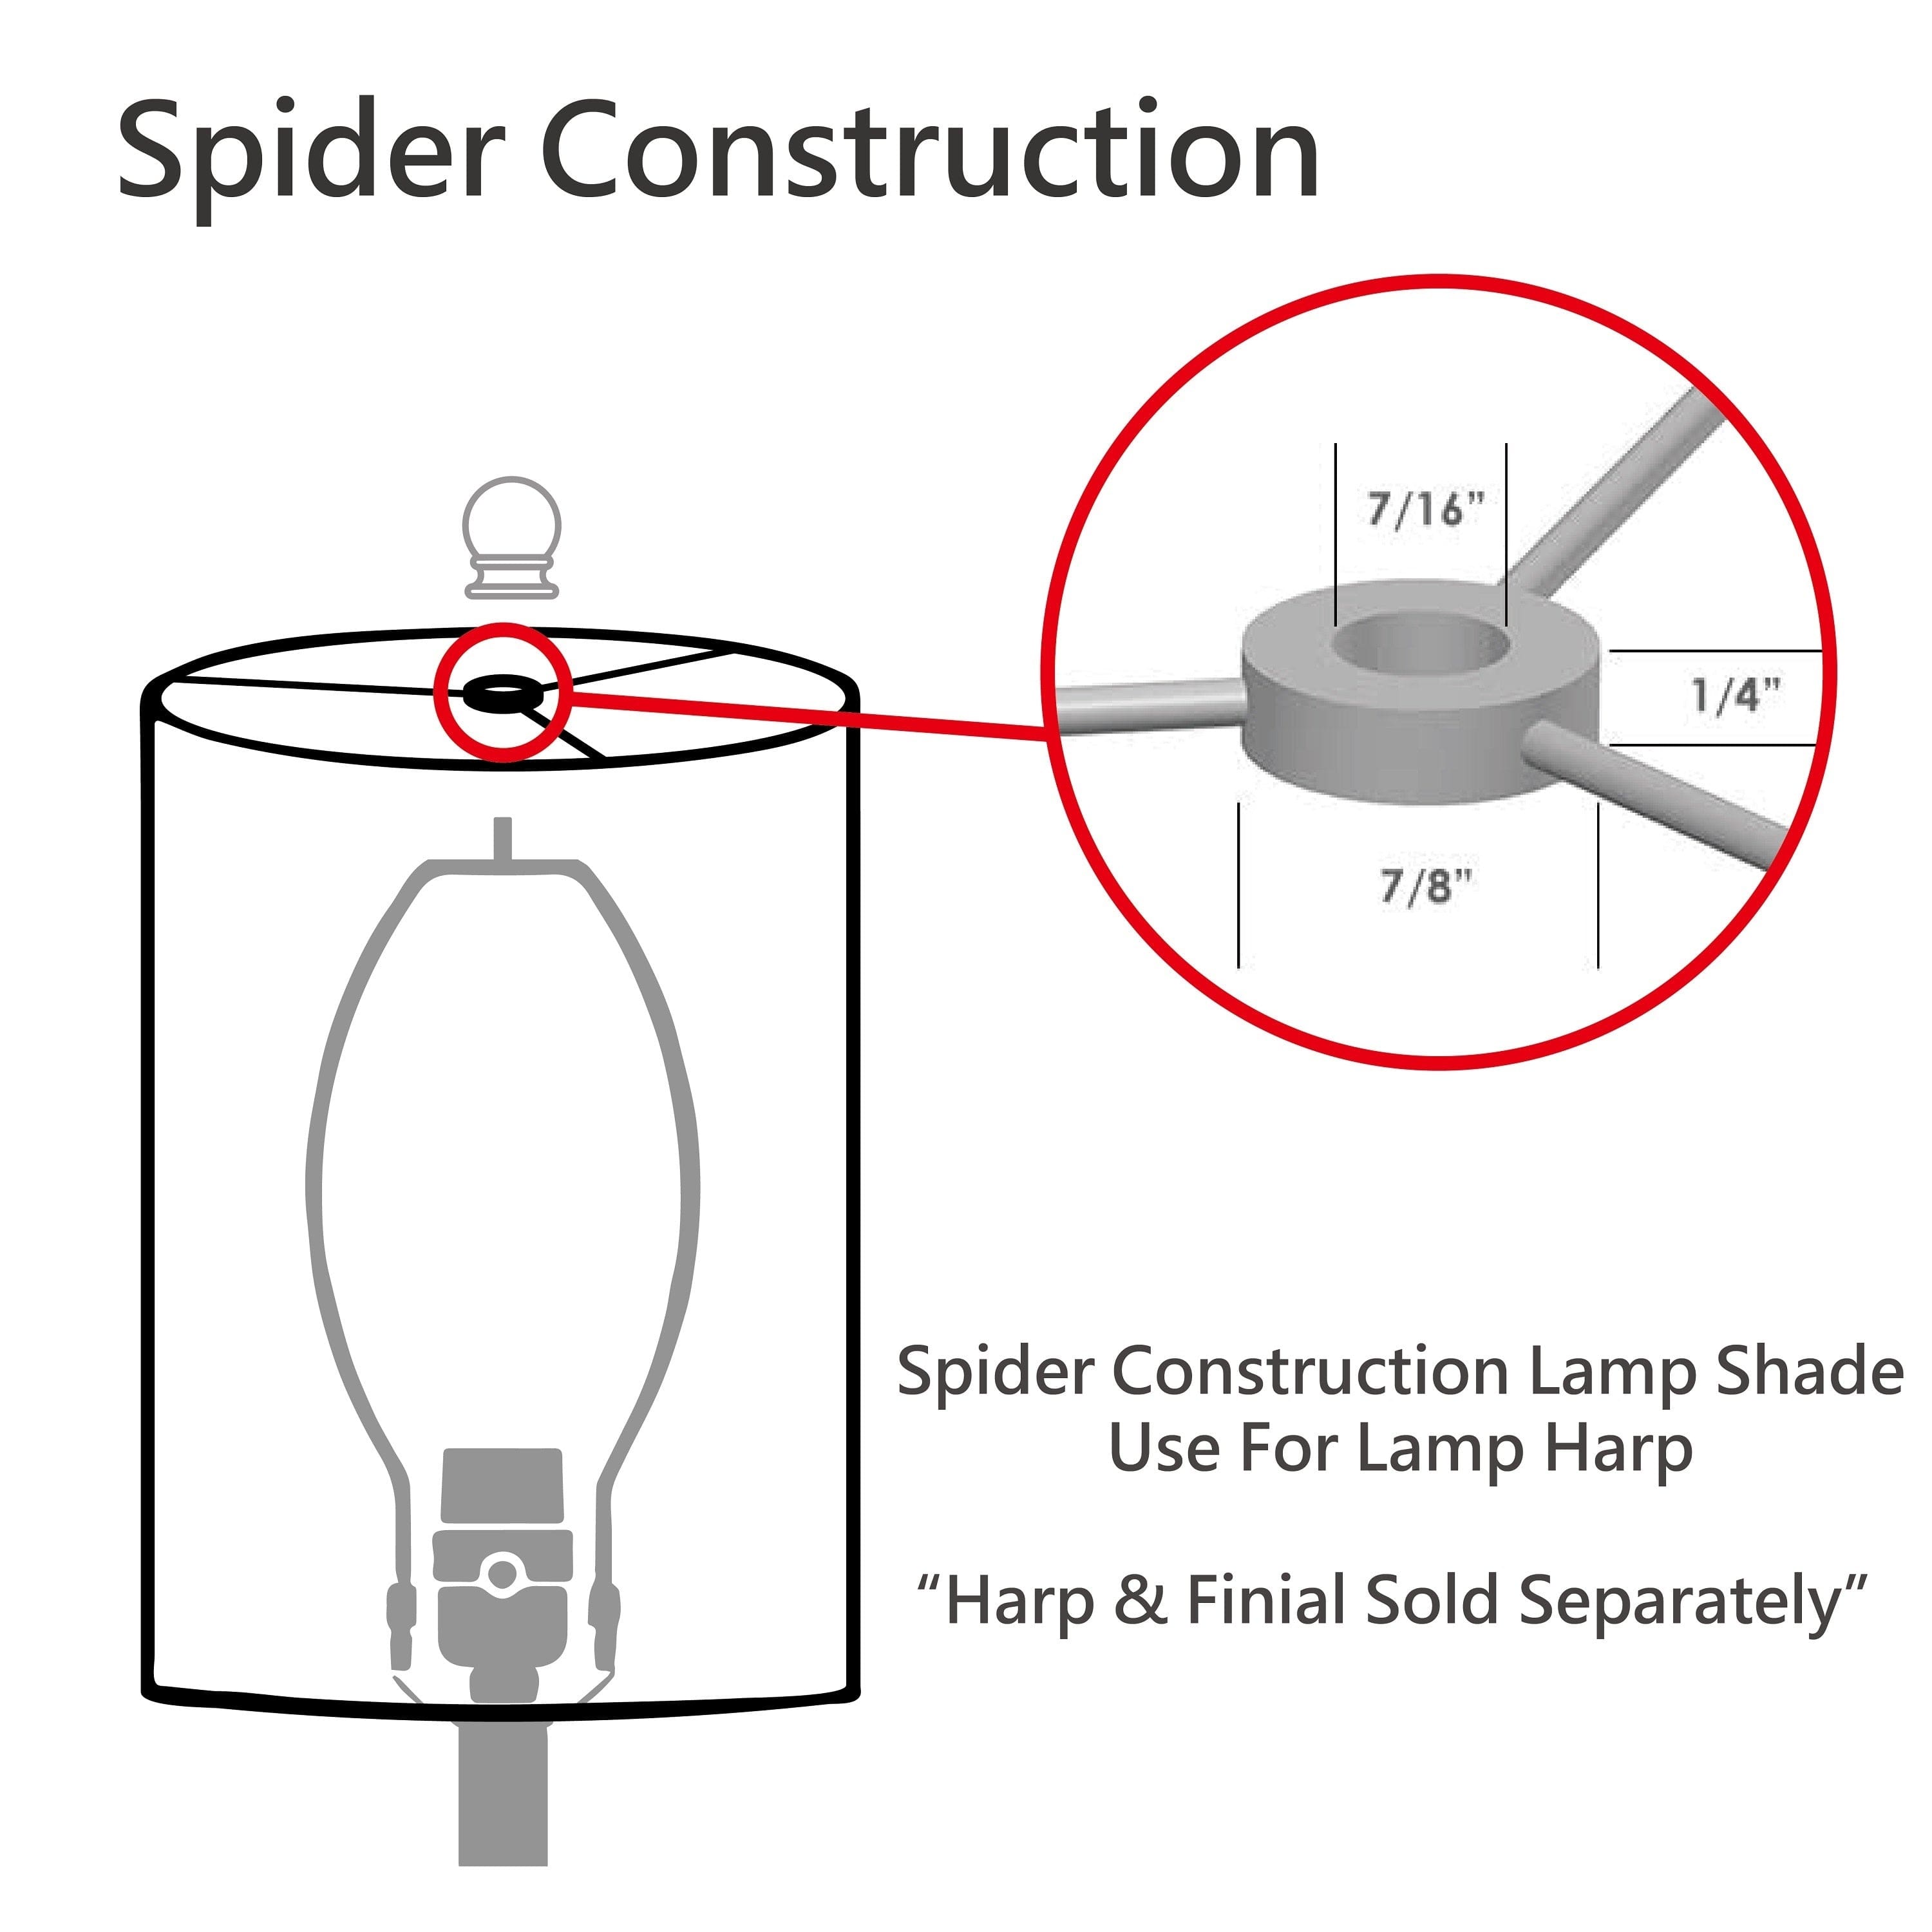 Aspen Creative Scallop Bell Shape Spider Construction Lamp Shade in ...